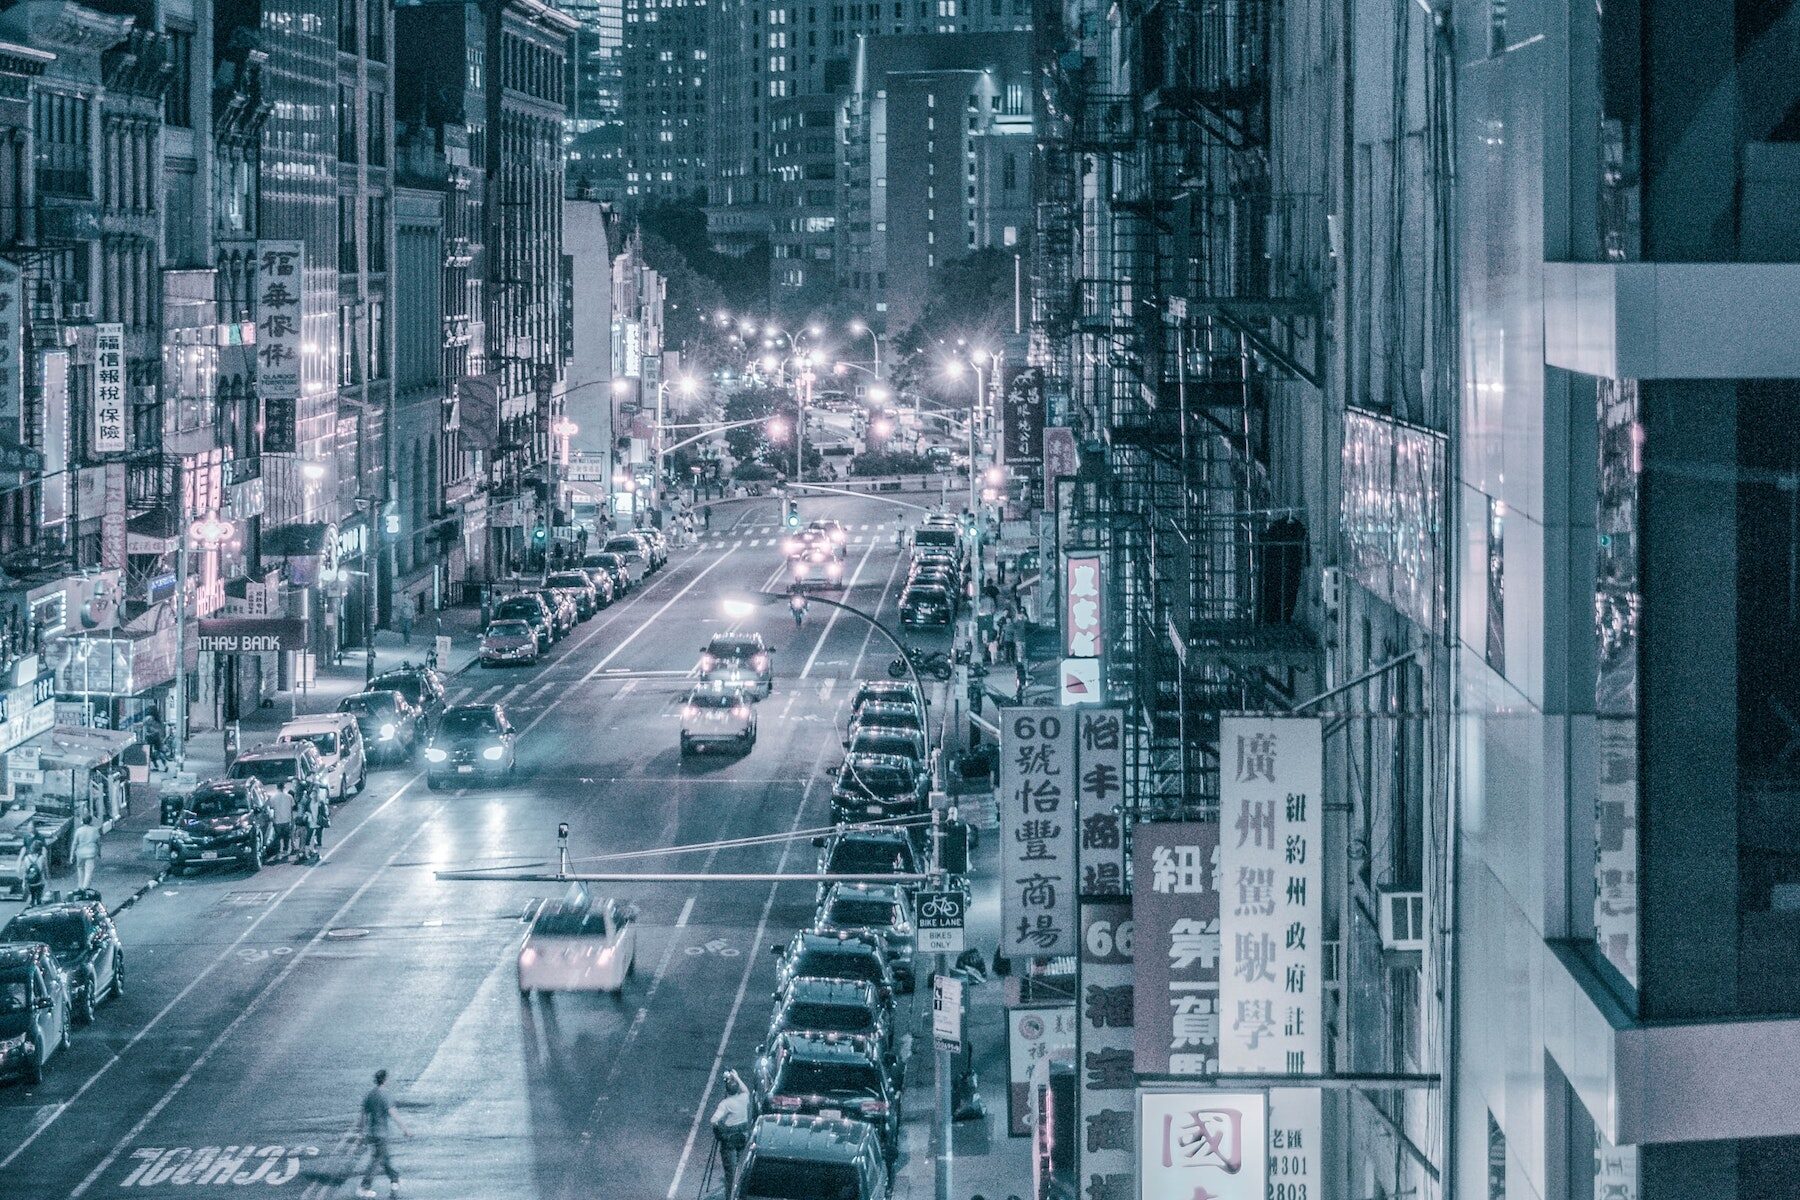 A photo of a New York City Chinatown street. There are cars on the street and signs along the buildings. Photo by Mauricio Chavez on Unsplash.